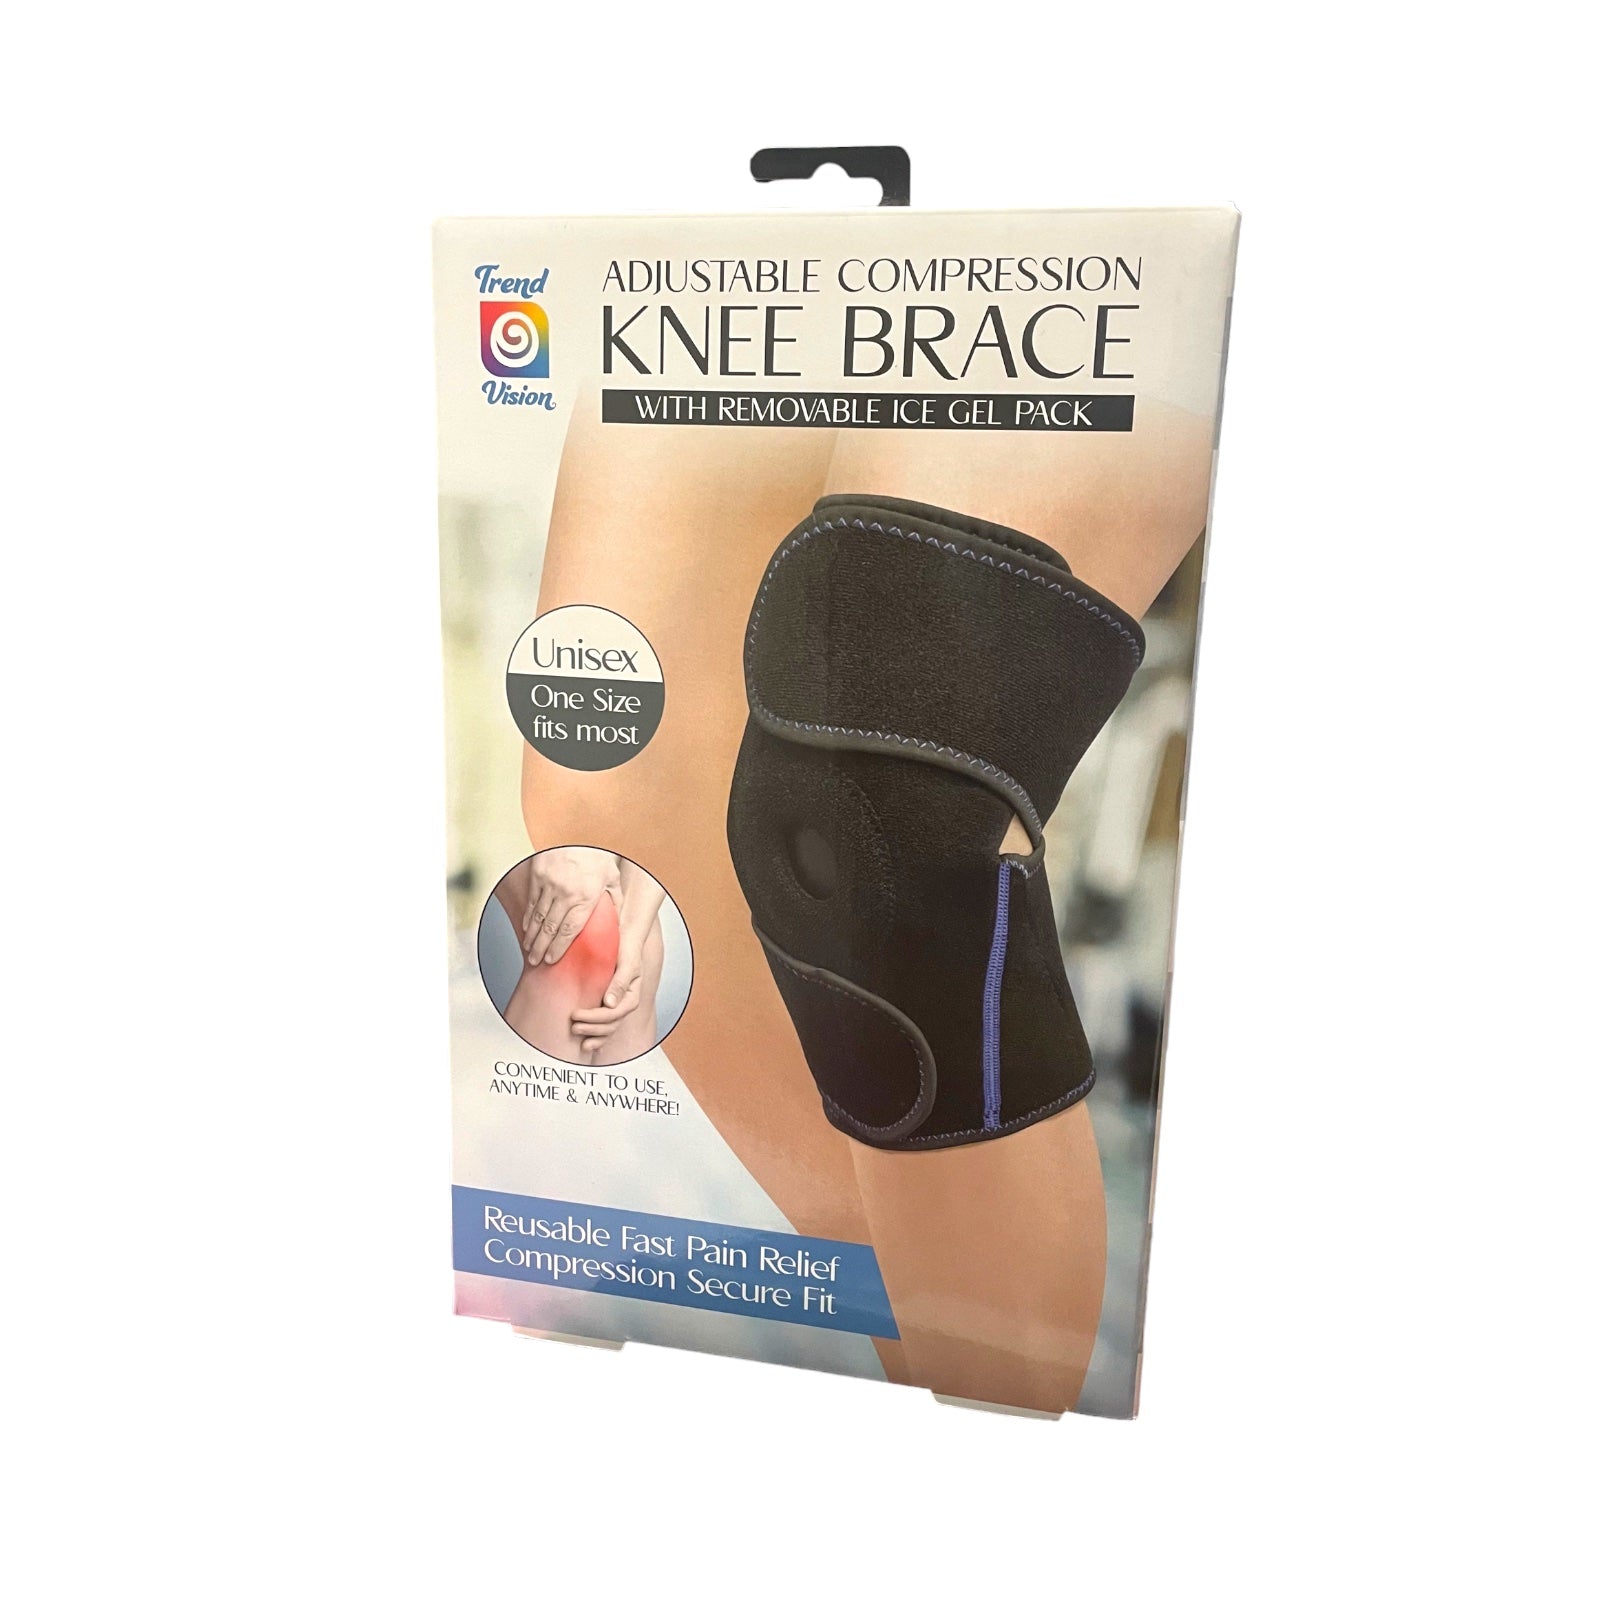 Adjustable Compresion Knee Brace with Removable Ice Gel Pack